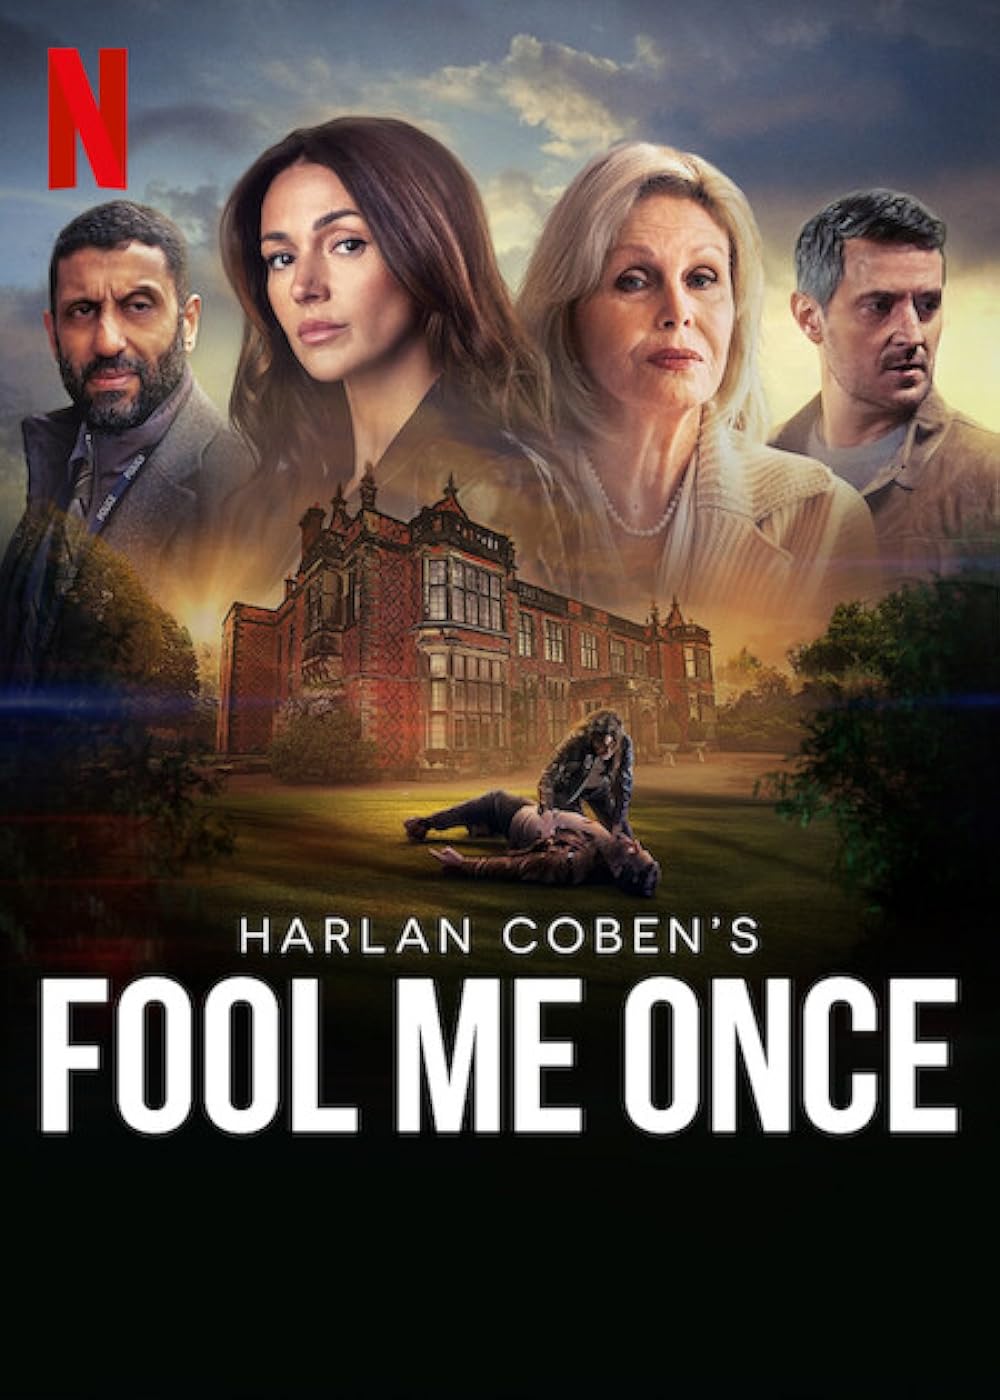 Fool Me Once Season 'Fool Me Once Season' follows Maya Stern's quest for truth after capturing footage of her seemingly dead husband, featuring an ensemble cast including Richard Armitage, Joanna Lumley, and more.